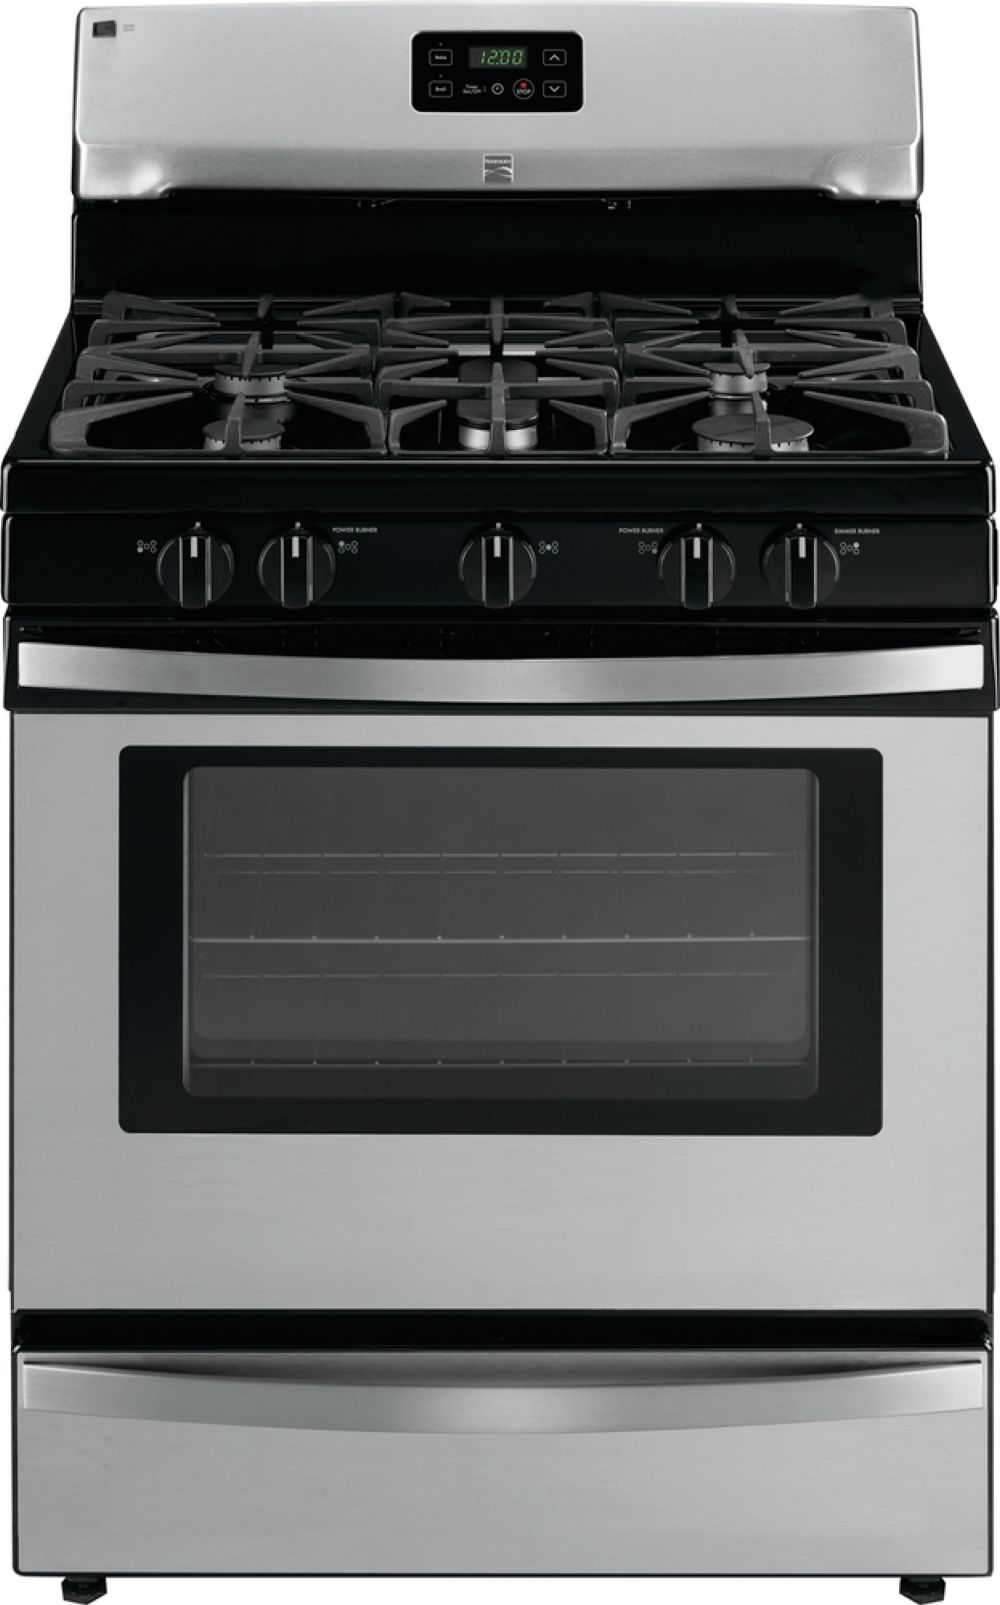 Kenmore Kenmore 74423 4.2 cu. ft. Gas Range with Broil & Serve Drawer - Stainless Steel